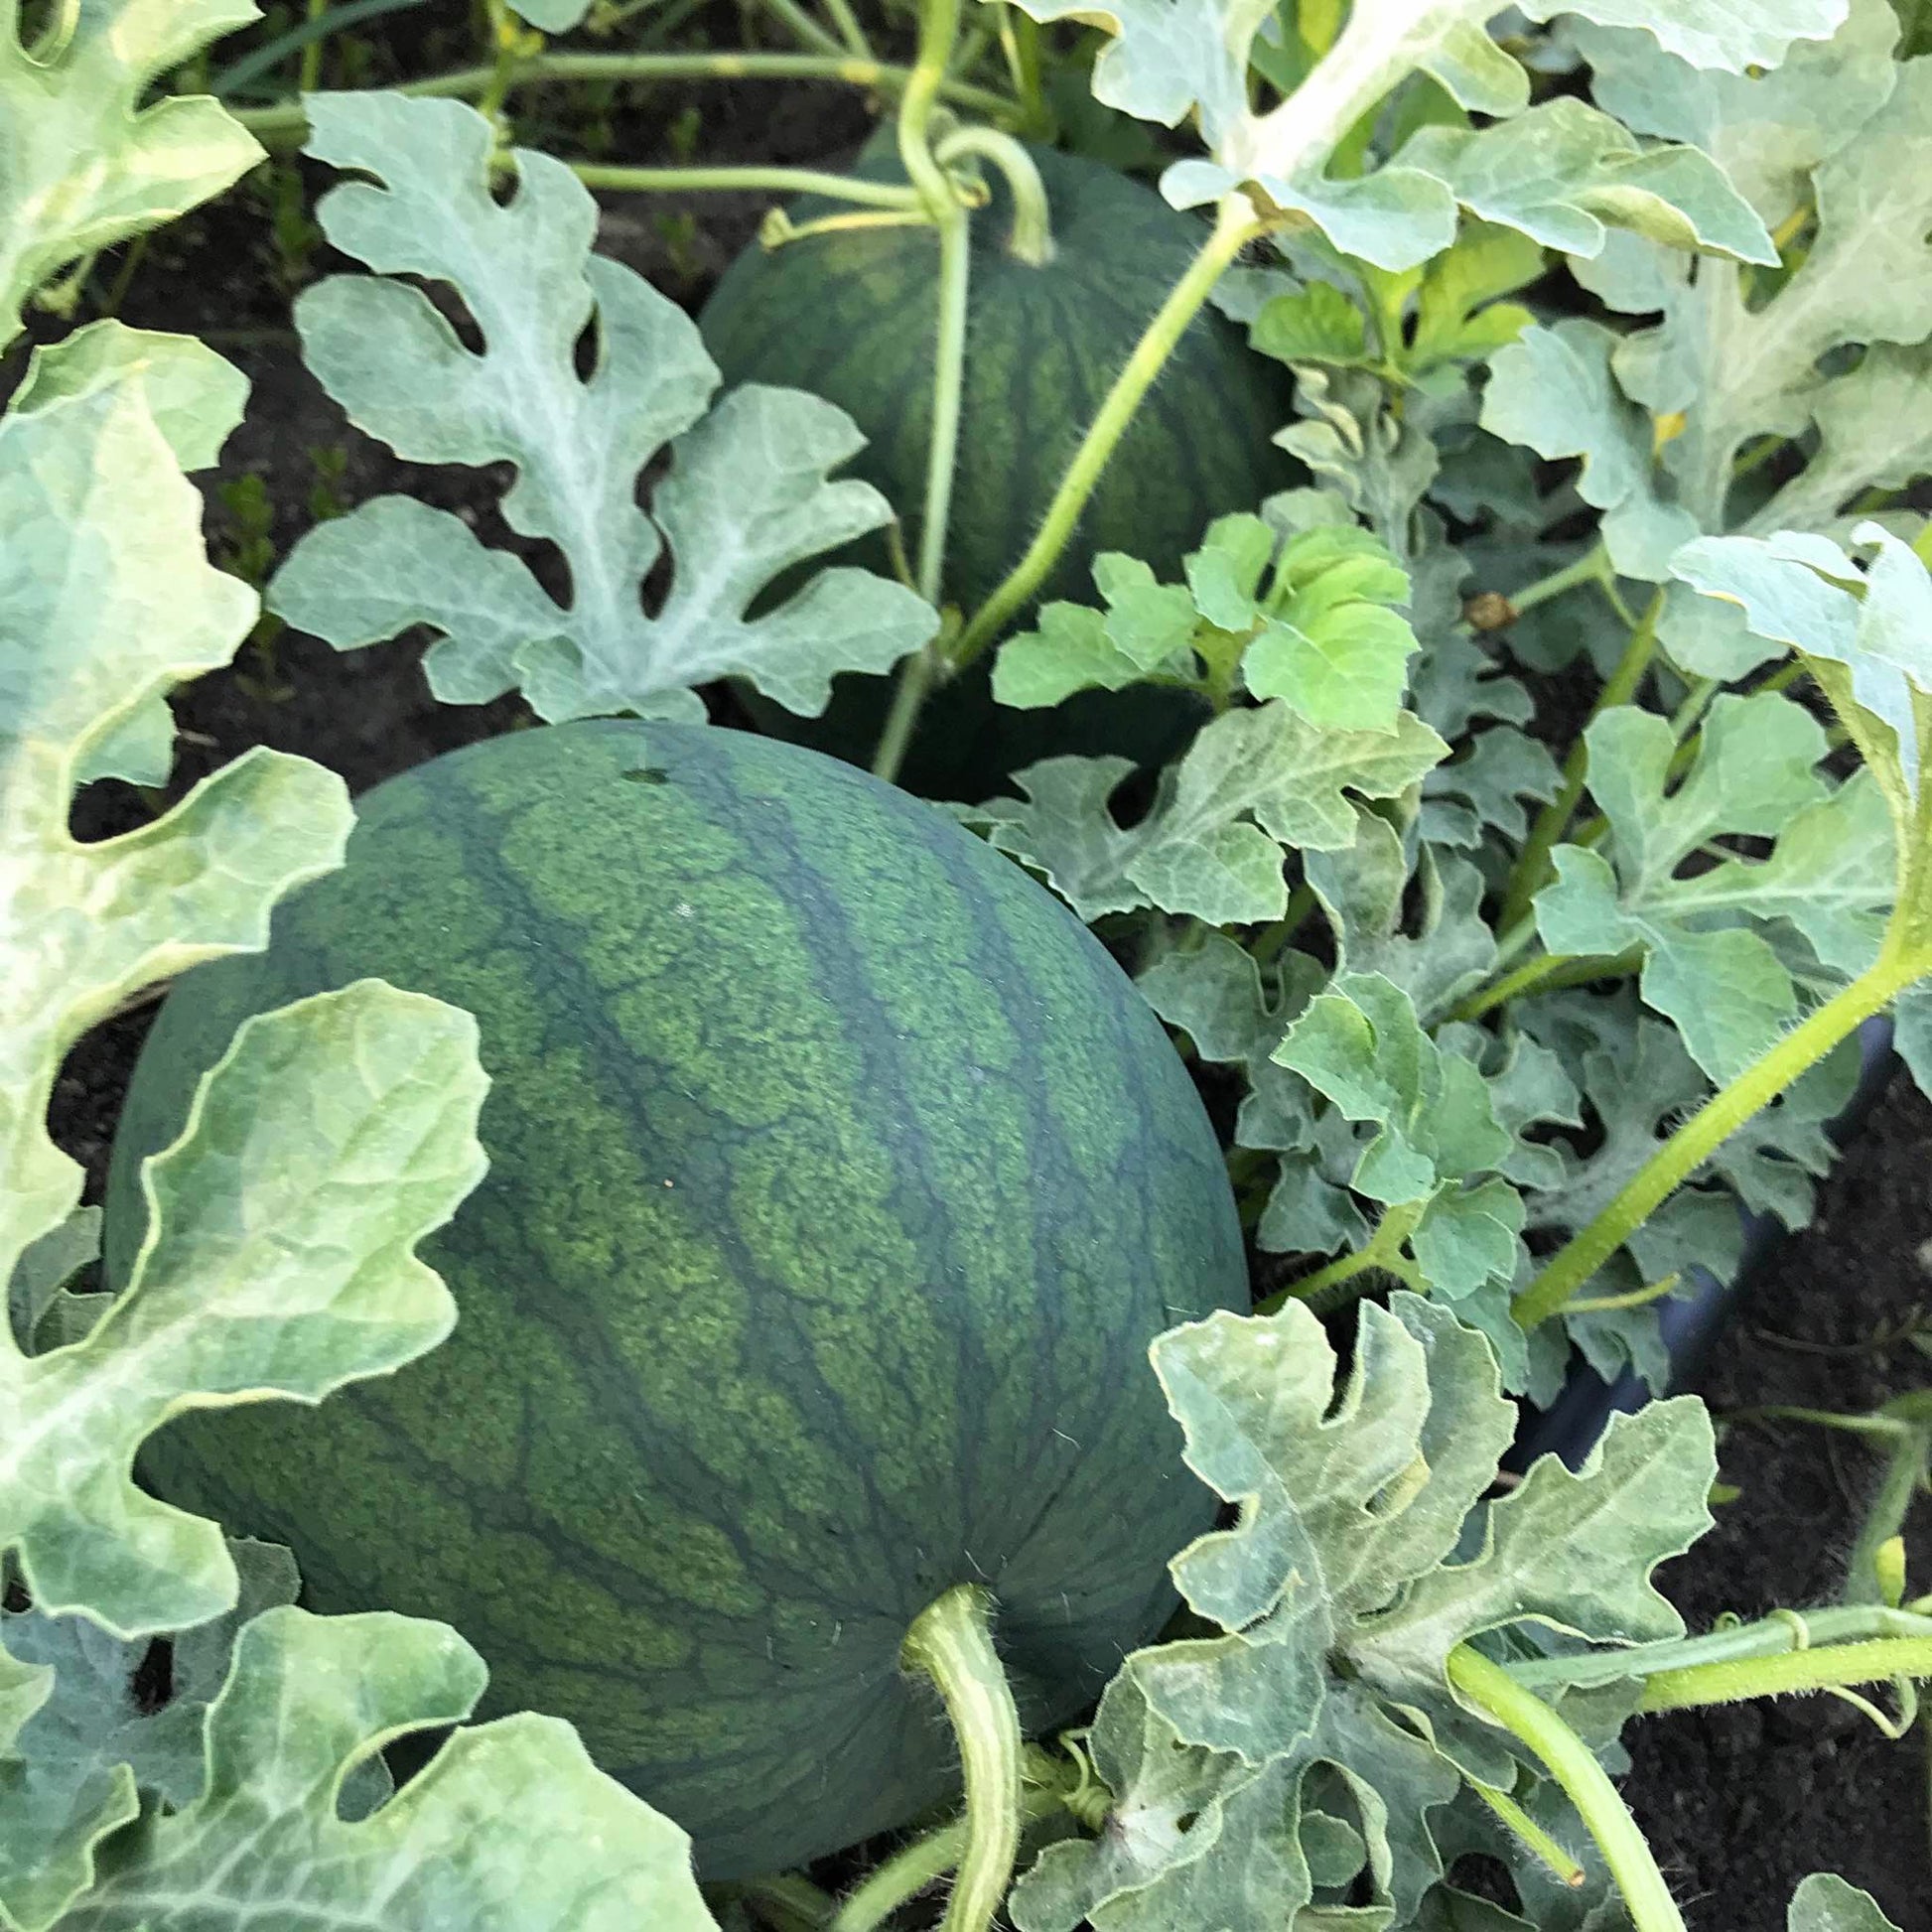 Watermelon plant with two nice looking melons tucked in among the leaves.